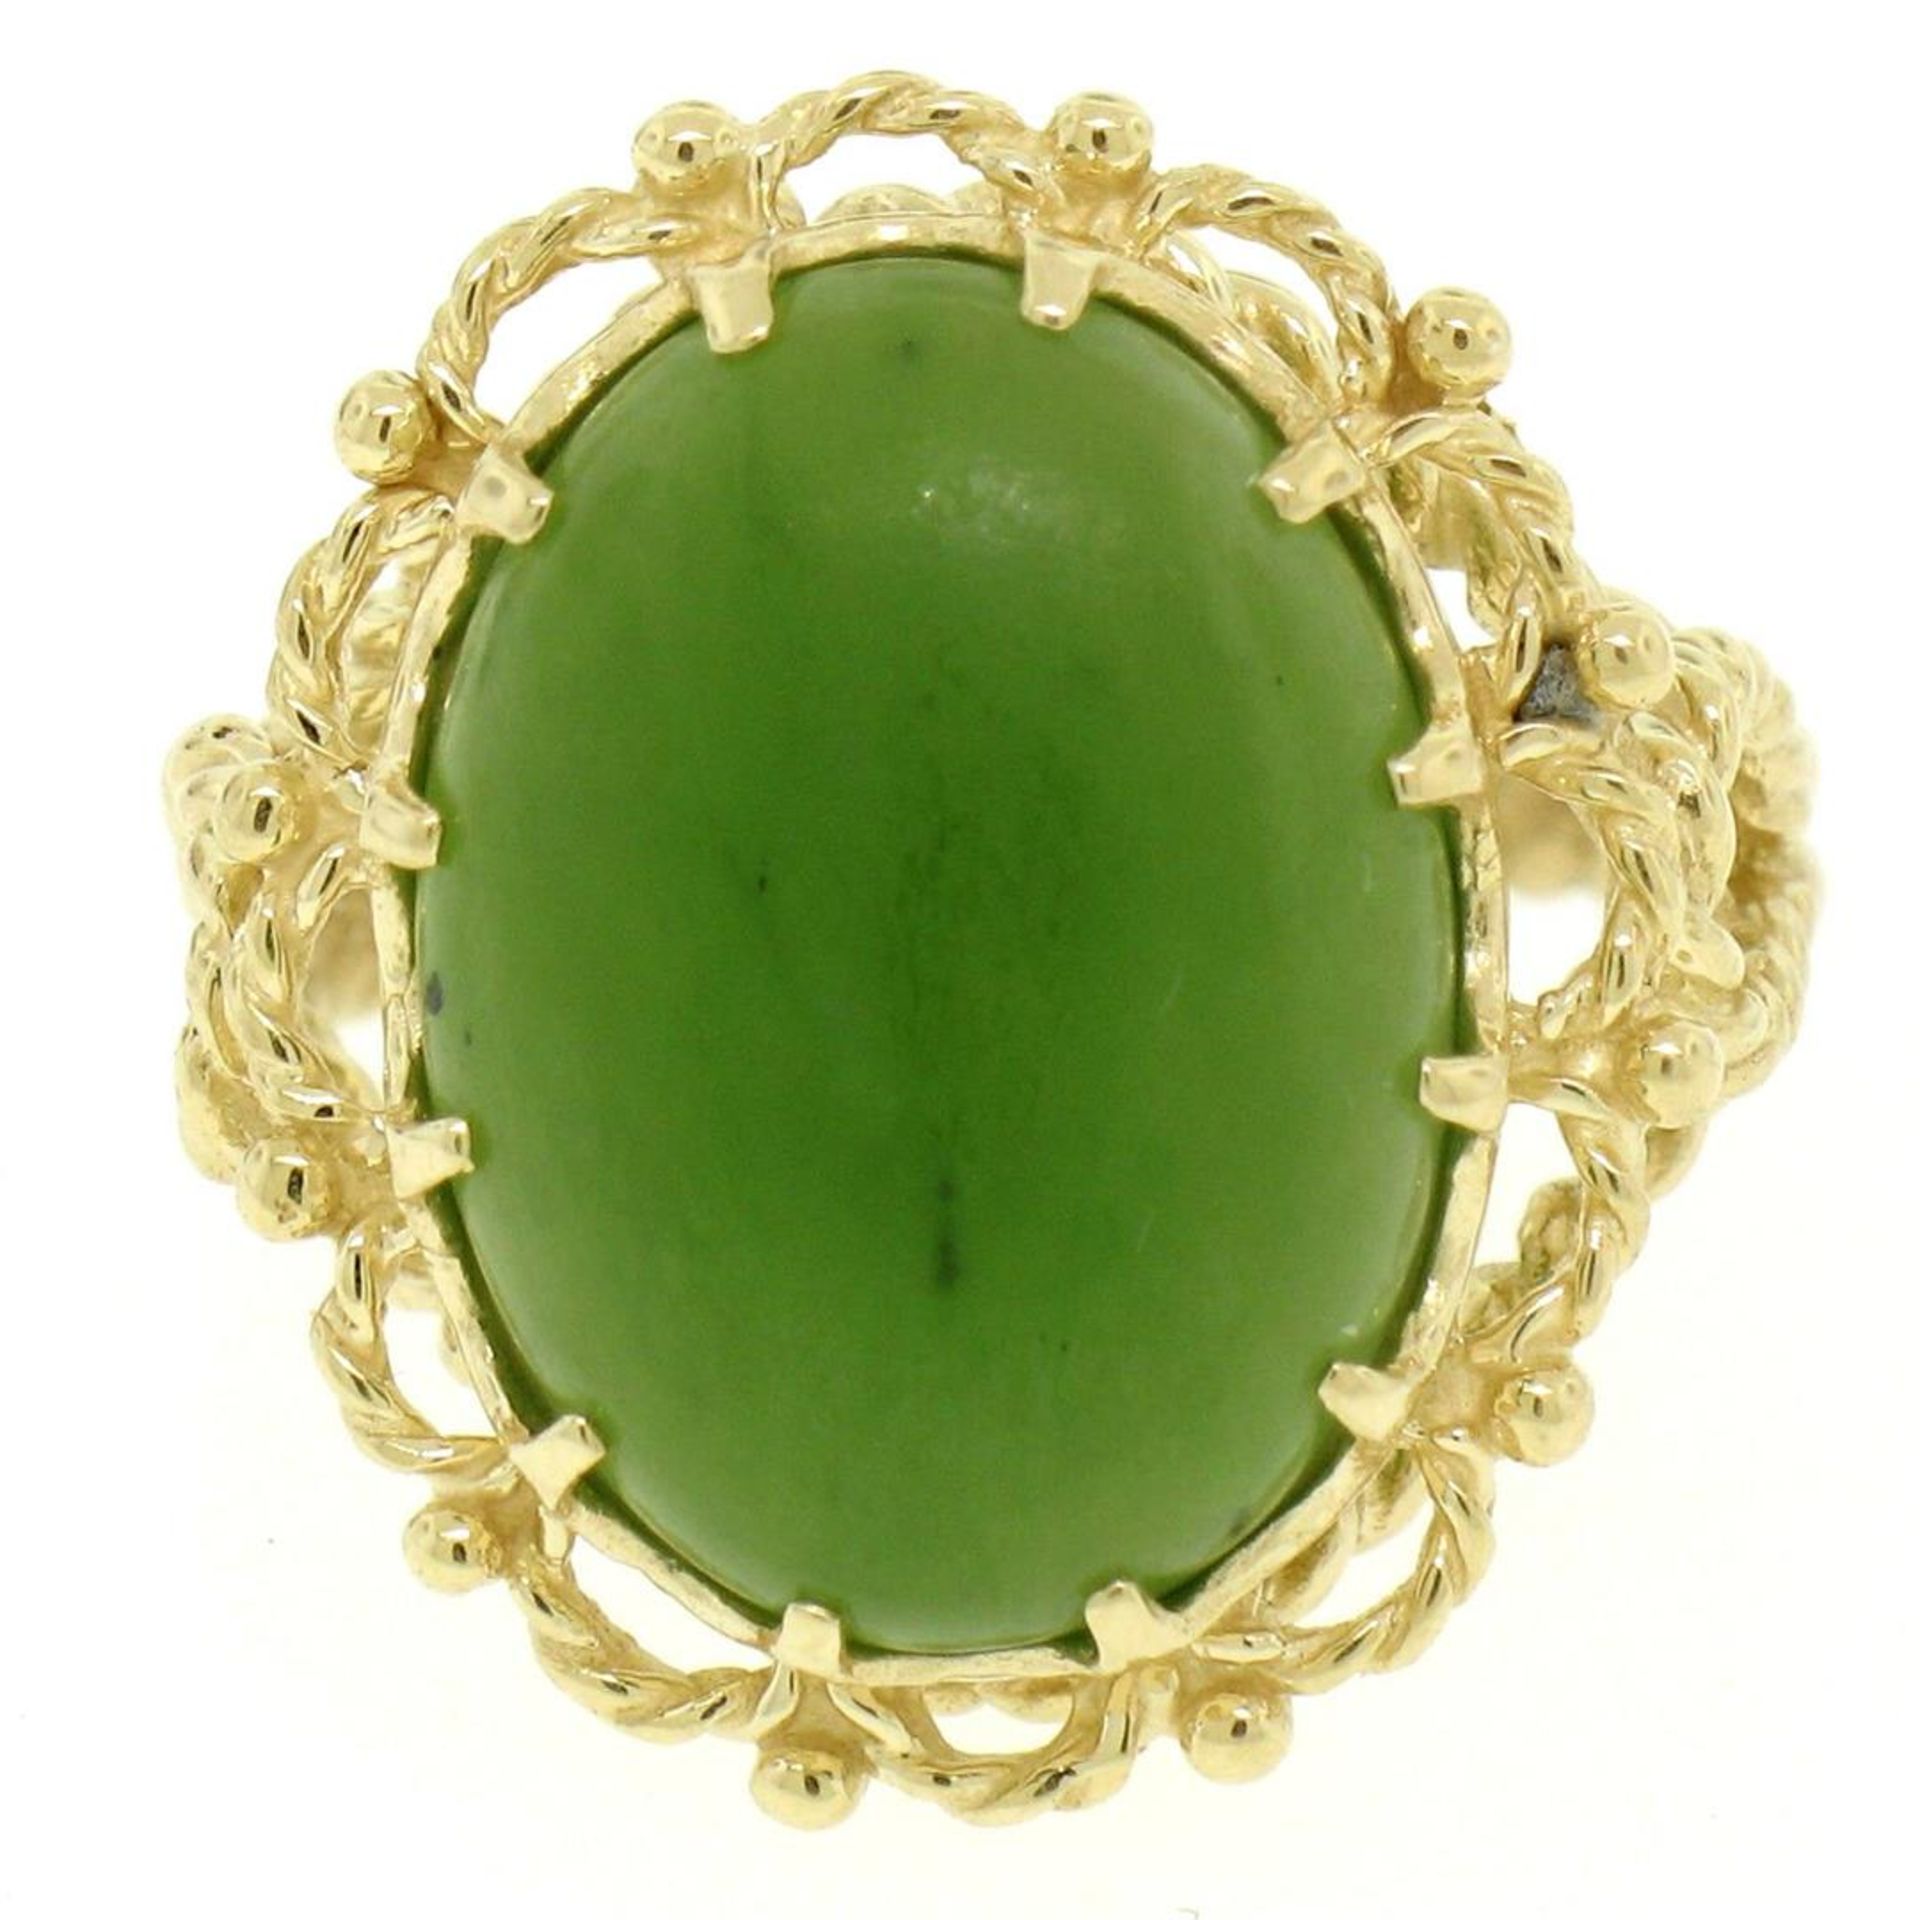 14k Yellow Gold Prong Set Cabochon Olive Green Nephrite Jade Twisted Wire Ring - Image 4 of 8